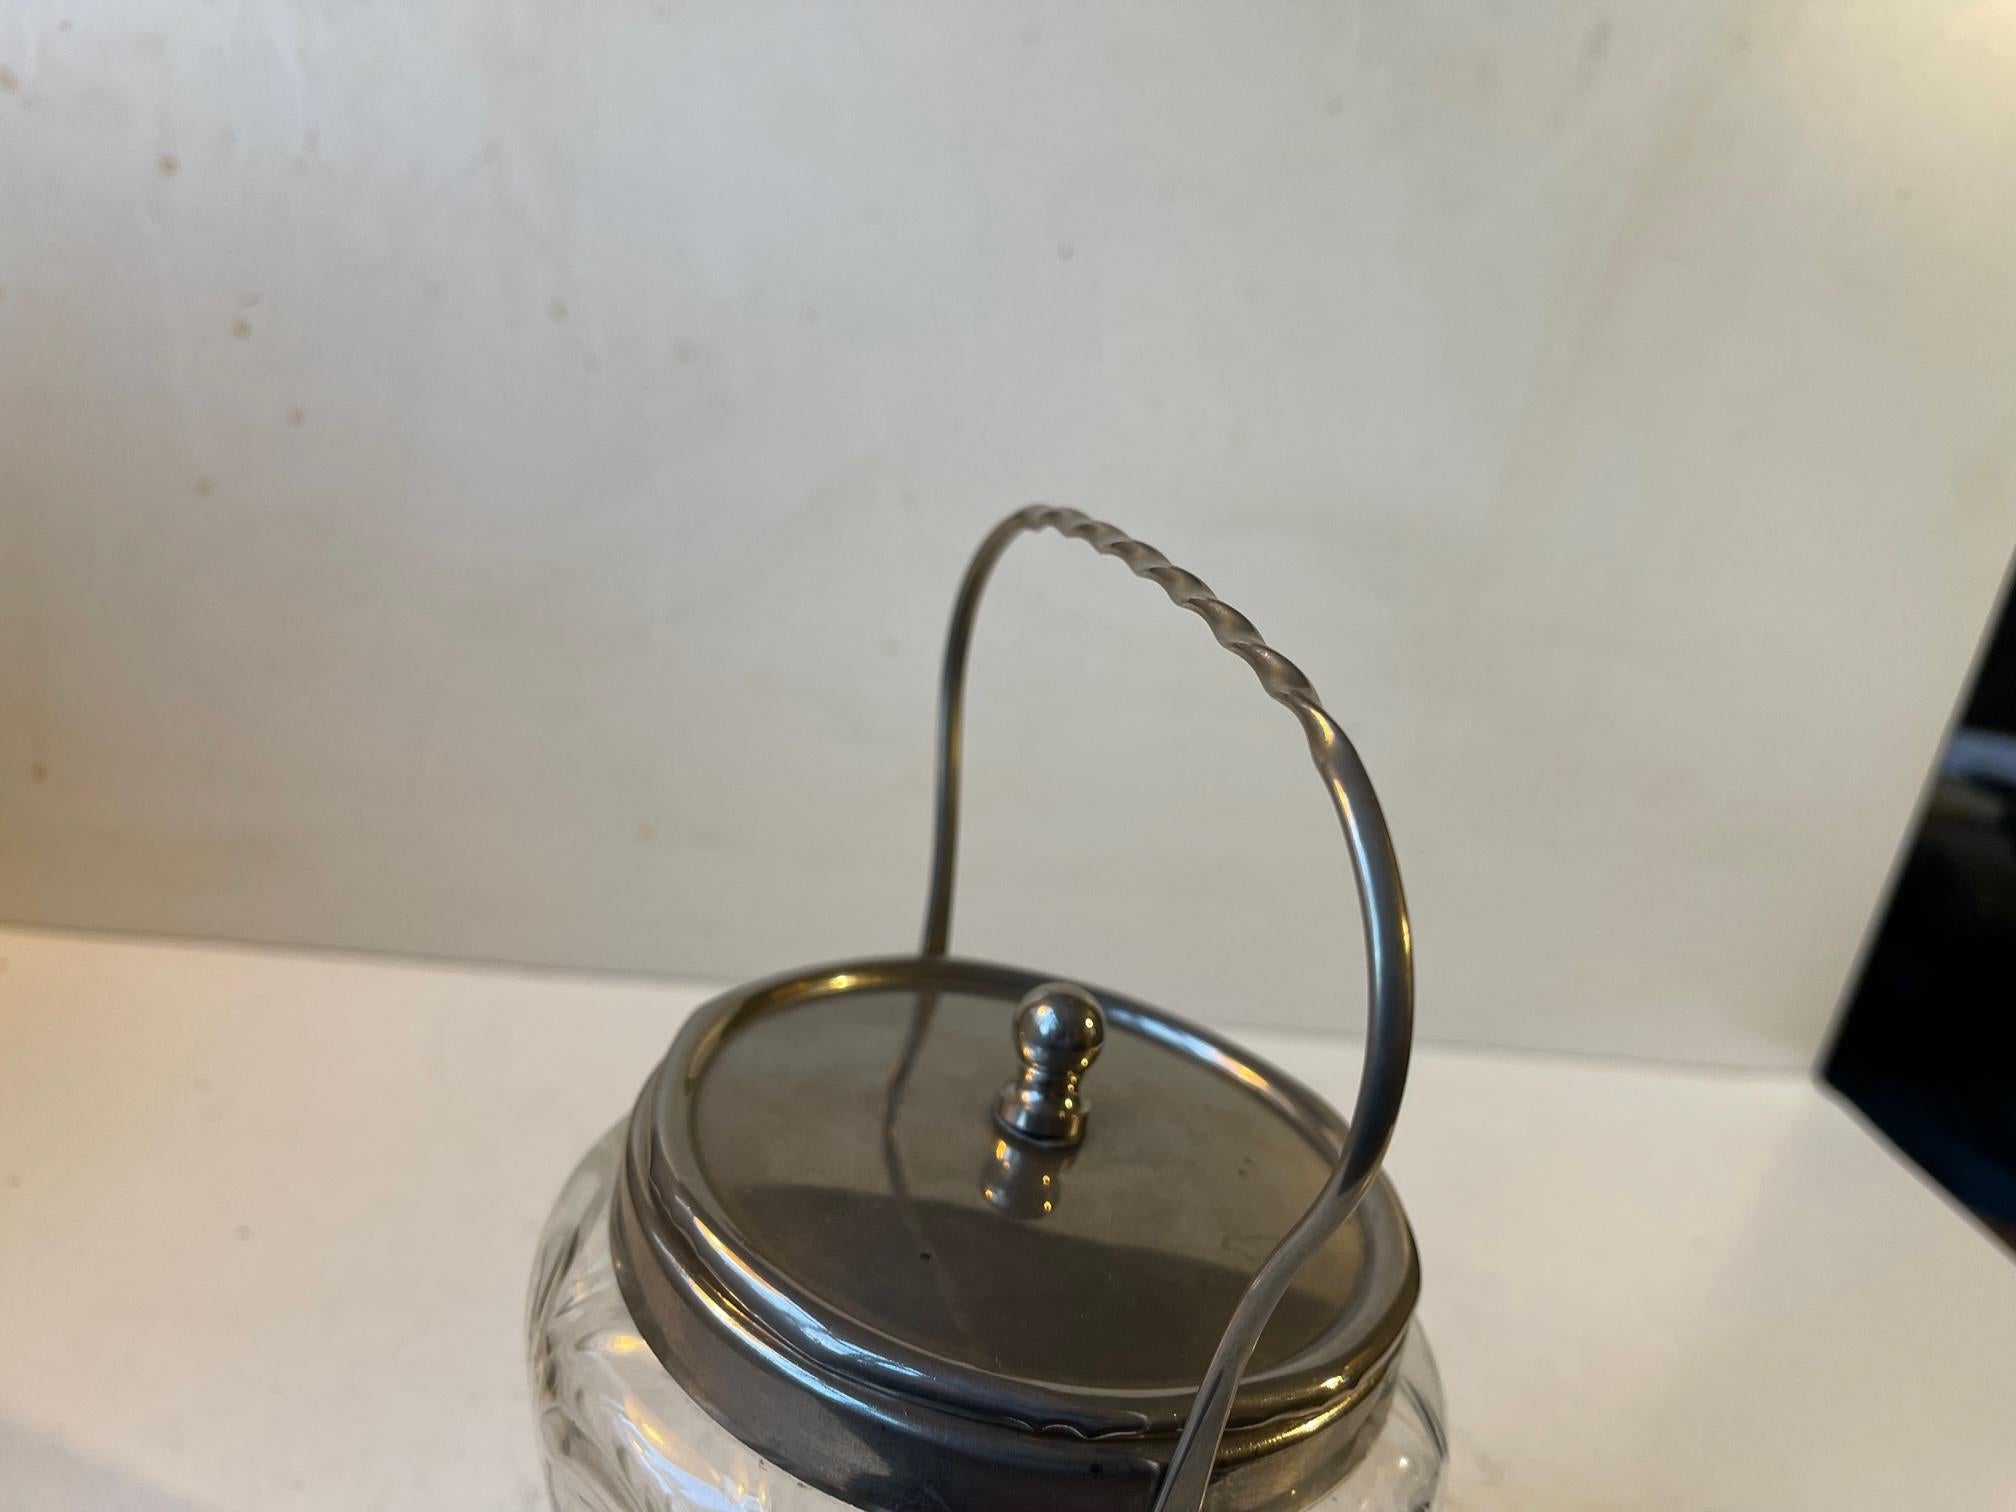 Antique Biscuit or Cookie Jar in Optical Glass by Holmegaard In Good Condition For Sale In Esbjerg, DK